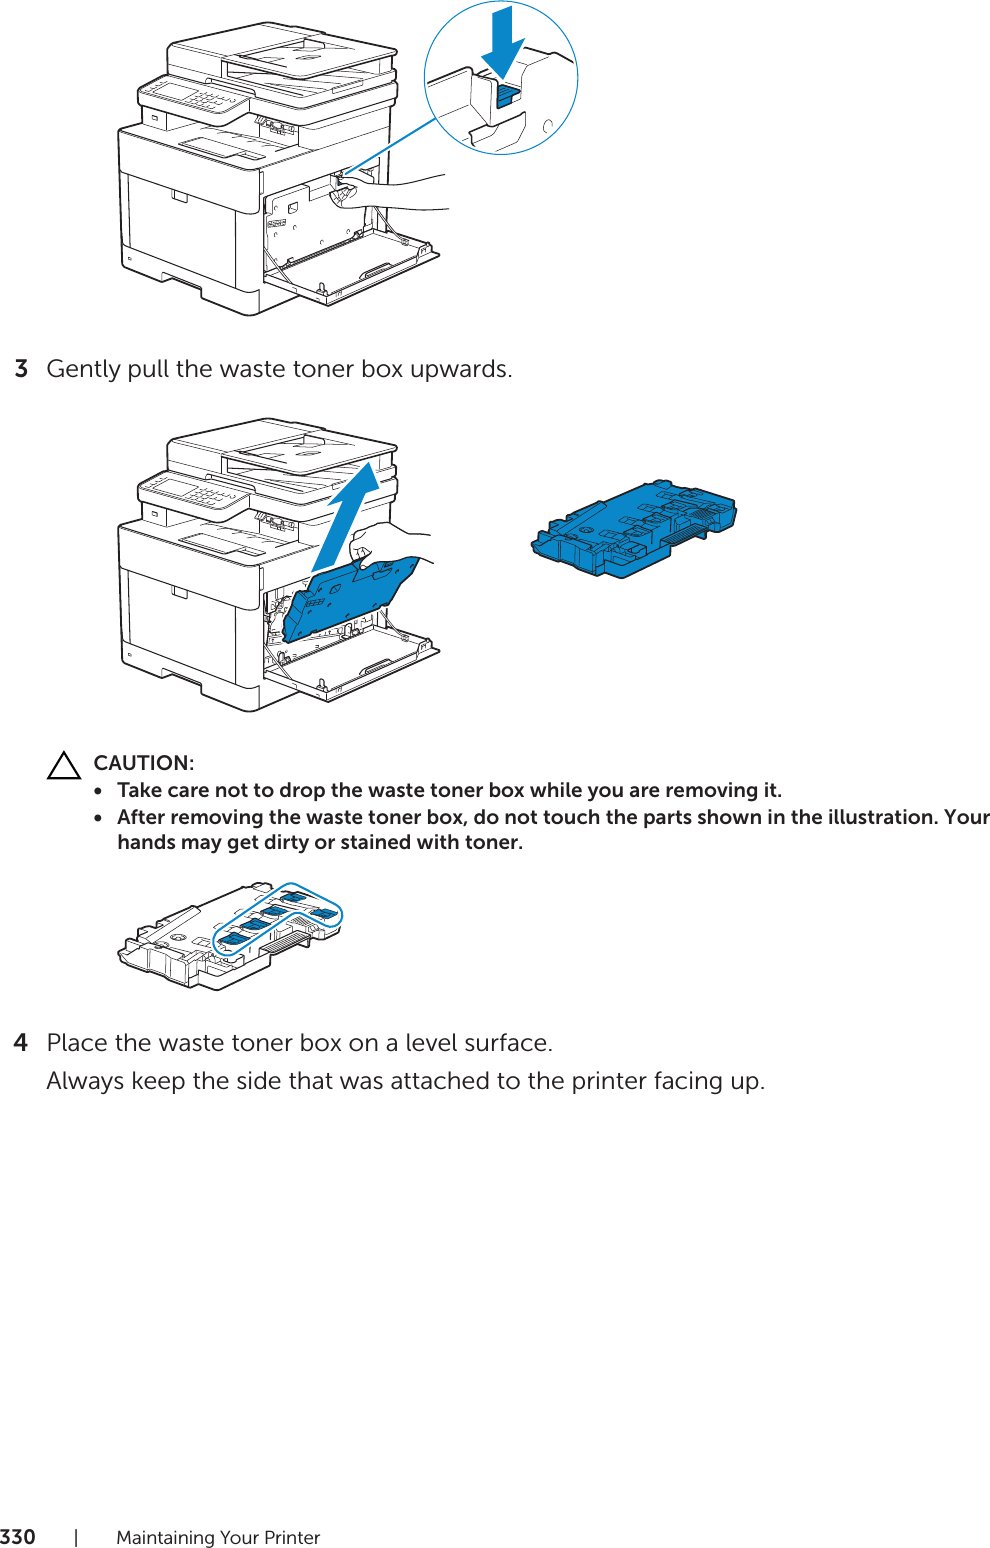 330| Maintaining Your Printer3Gently pull the waste toner box upwards. CAUTION:• Take care not to drop the waste toner box while you are removing it.• After removing the waste toner box, do not touch the parts shown in the illustration. Your hands may get dirty or stained with toner.4Place the waste toner box on a level surface. Always keep the side that was attached to the printer facing up.